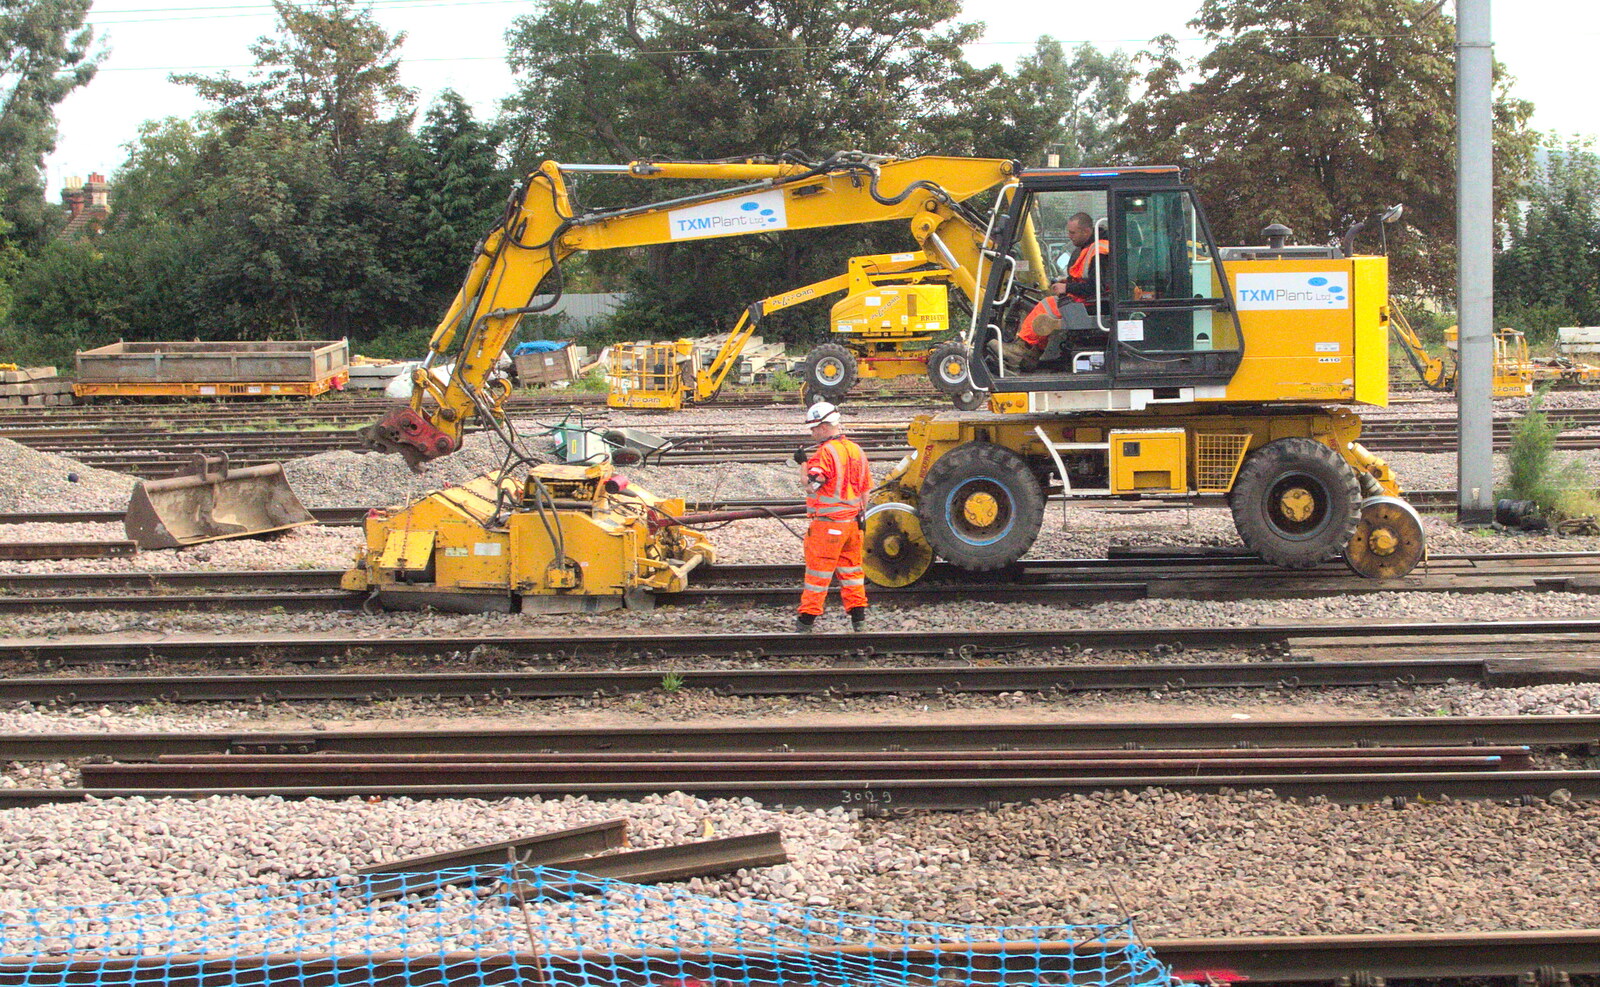 More converted digger action from New Railway and a Trip to Ikea, Ipswich and Thurrock - 19th September 2014